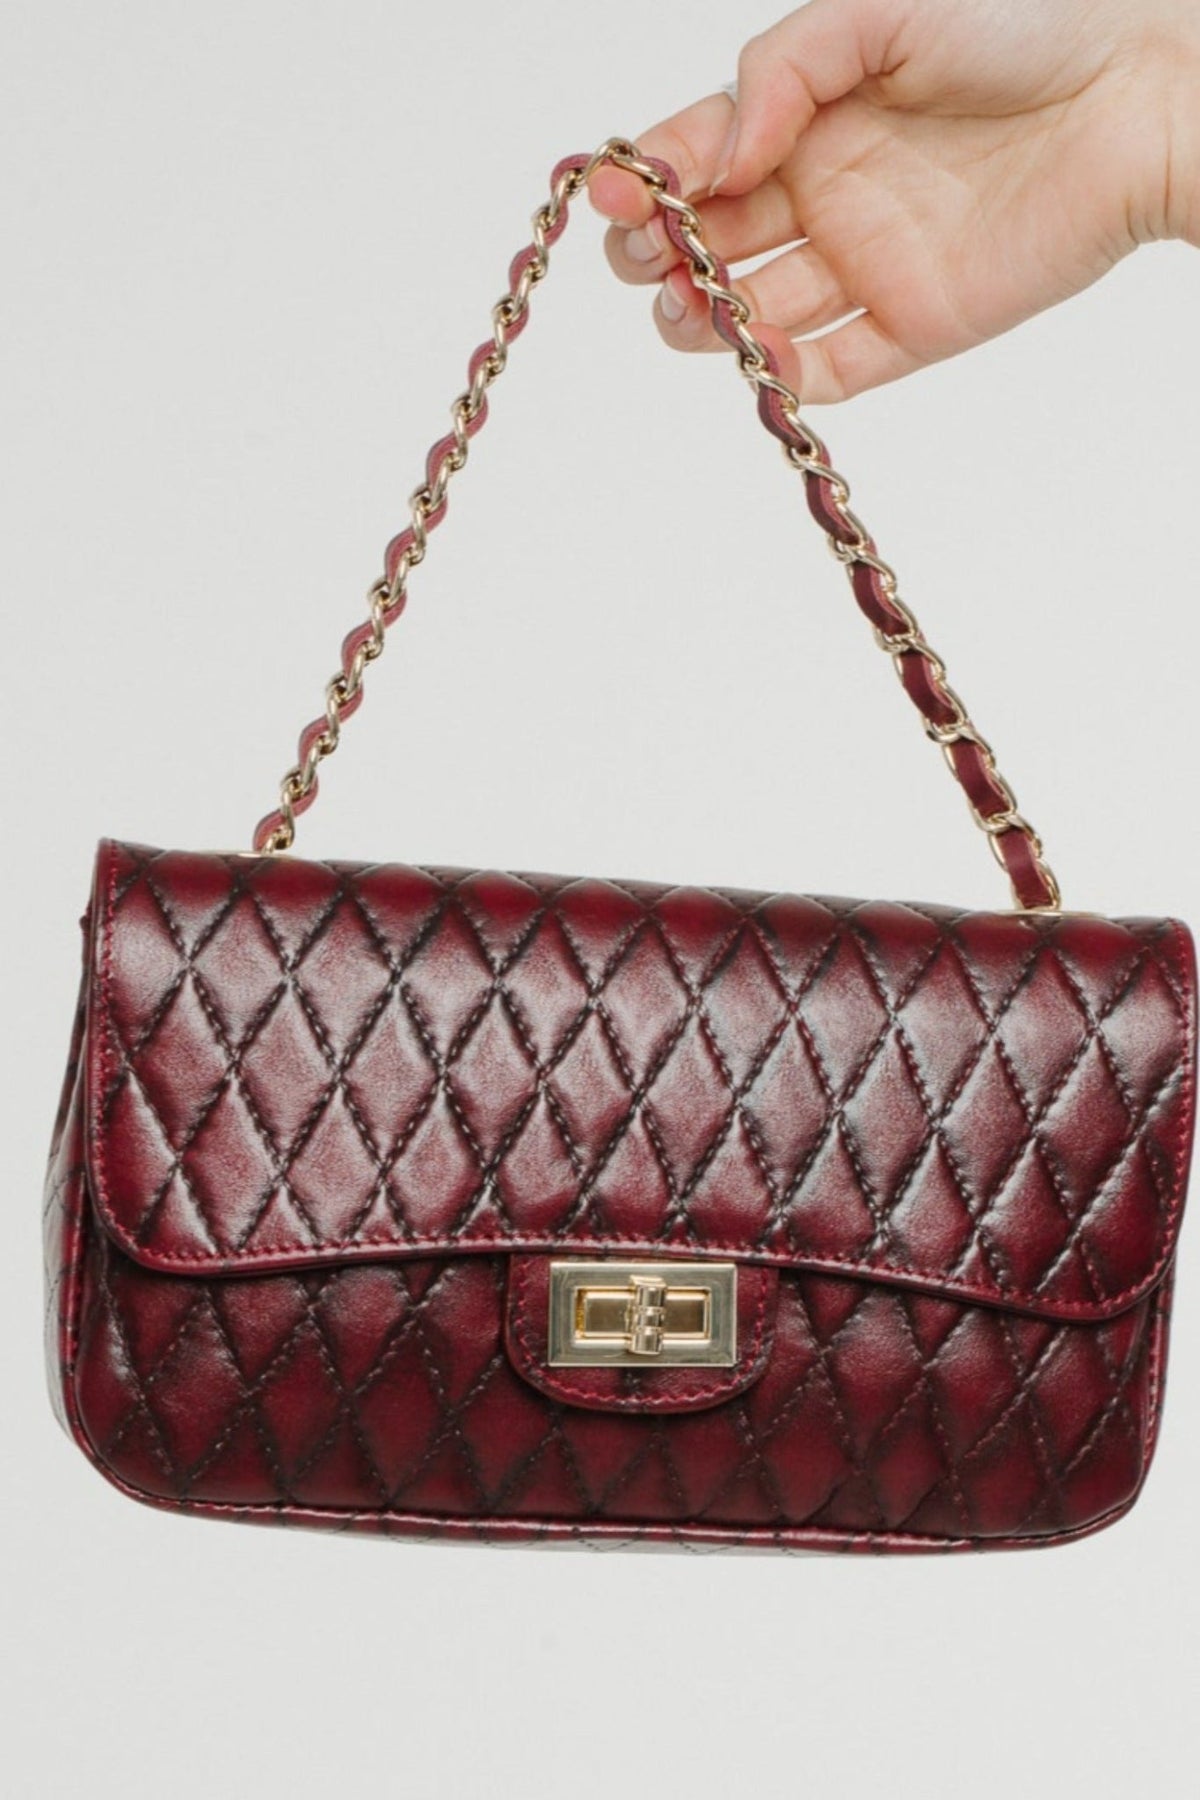 Amber Quilted Bag In Wine Red - The Walk in Wardrobe